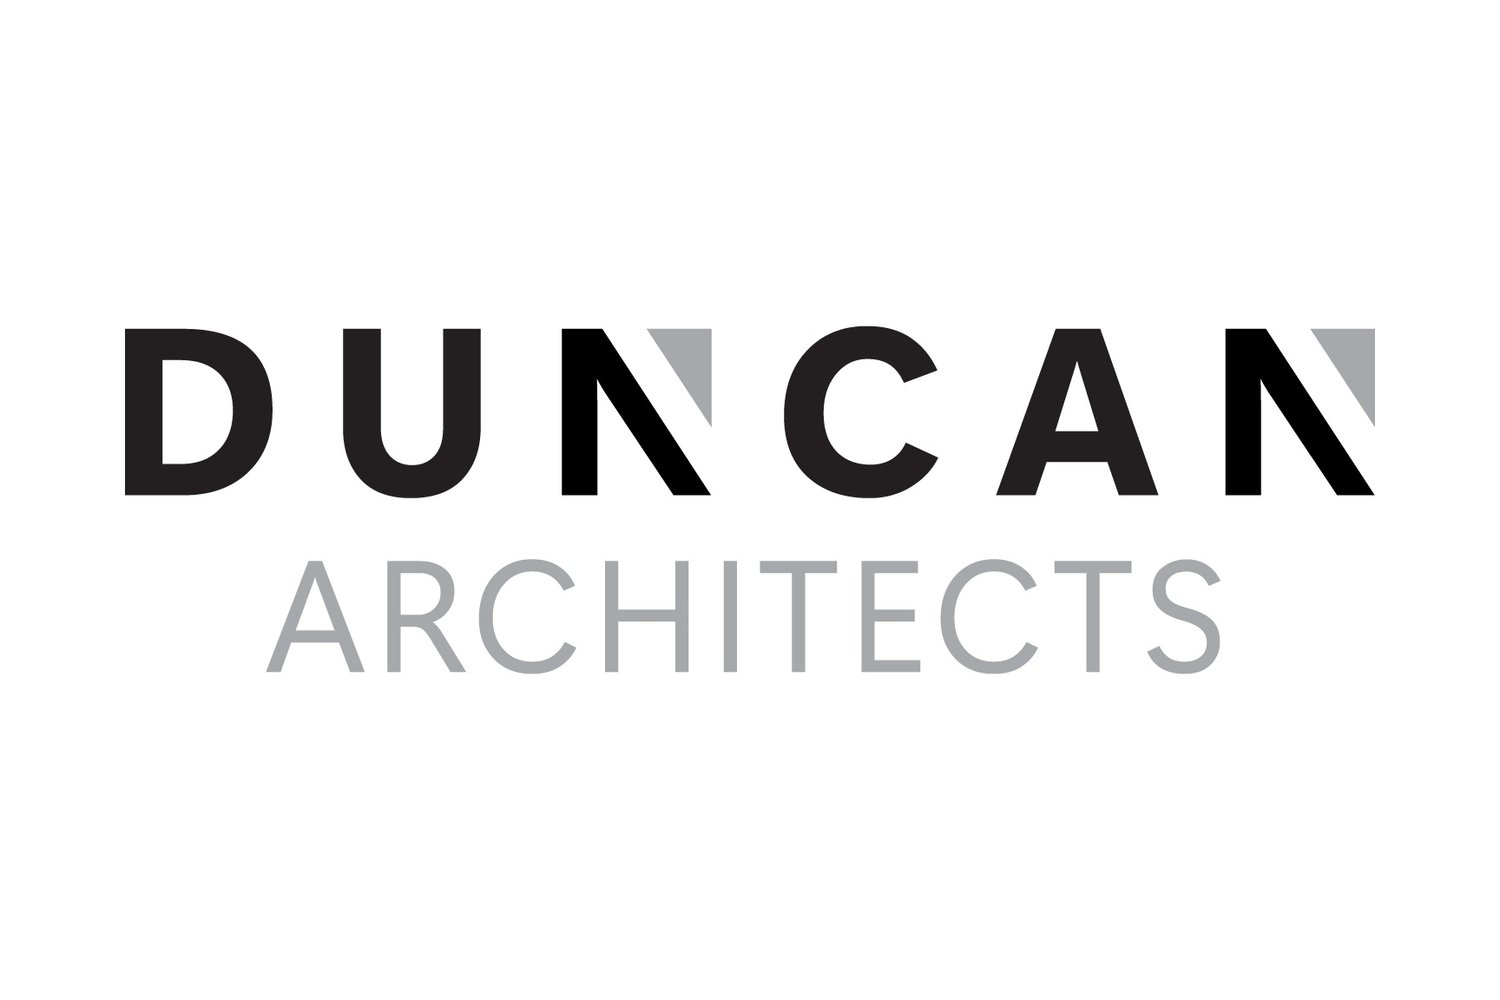 DUNCAN ARCHITECTS